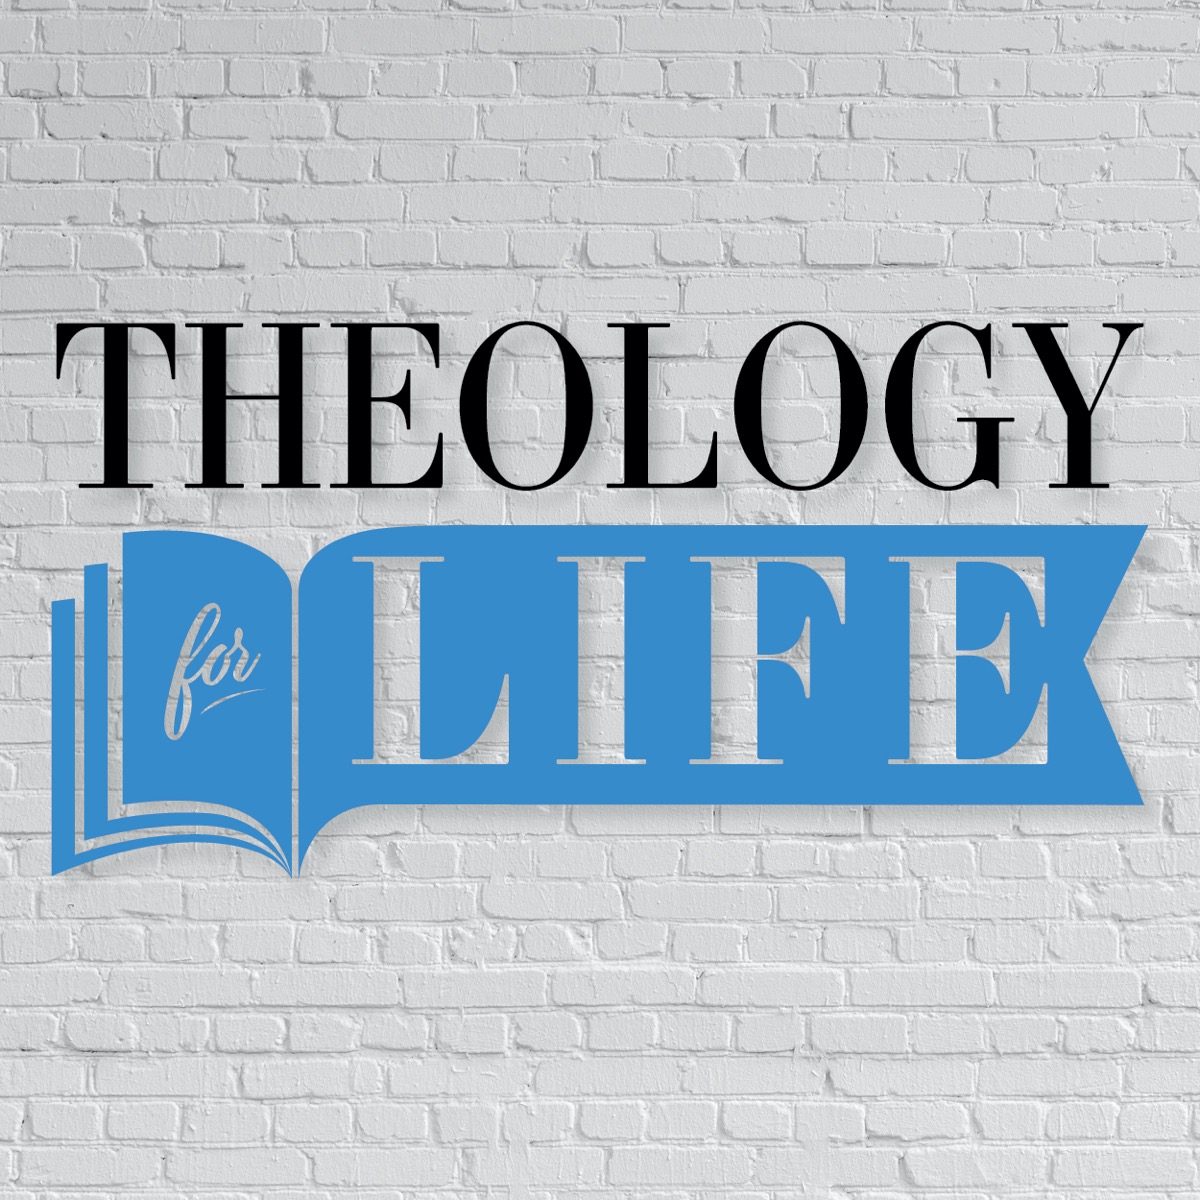 Featured image for “Theology for Life”